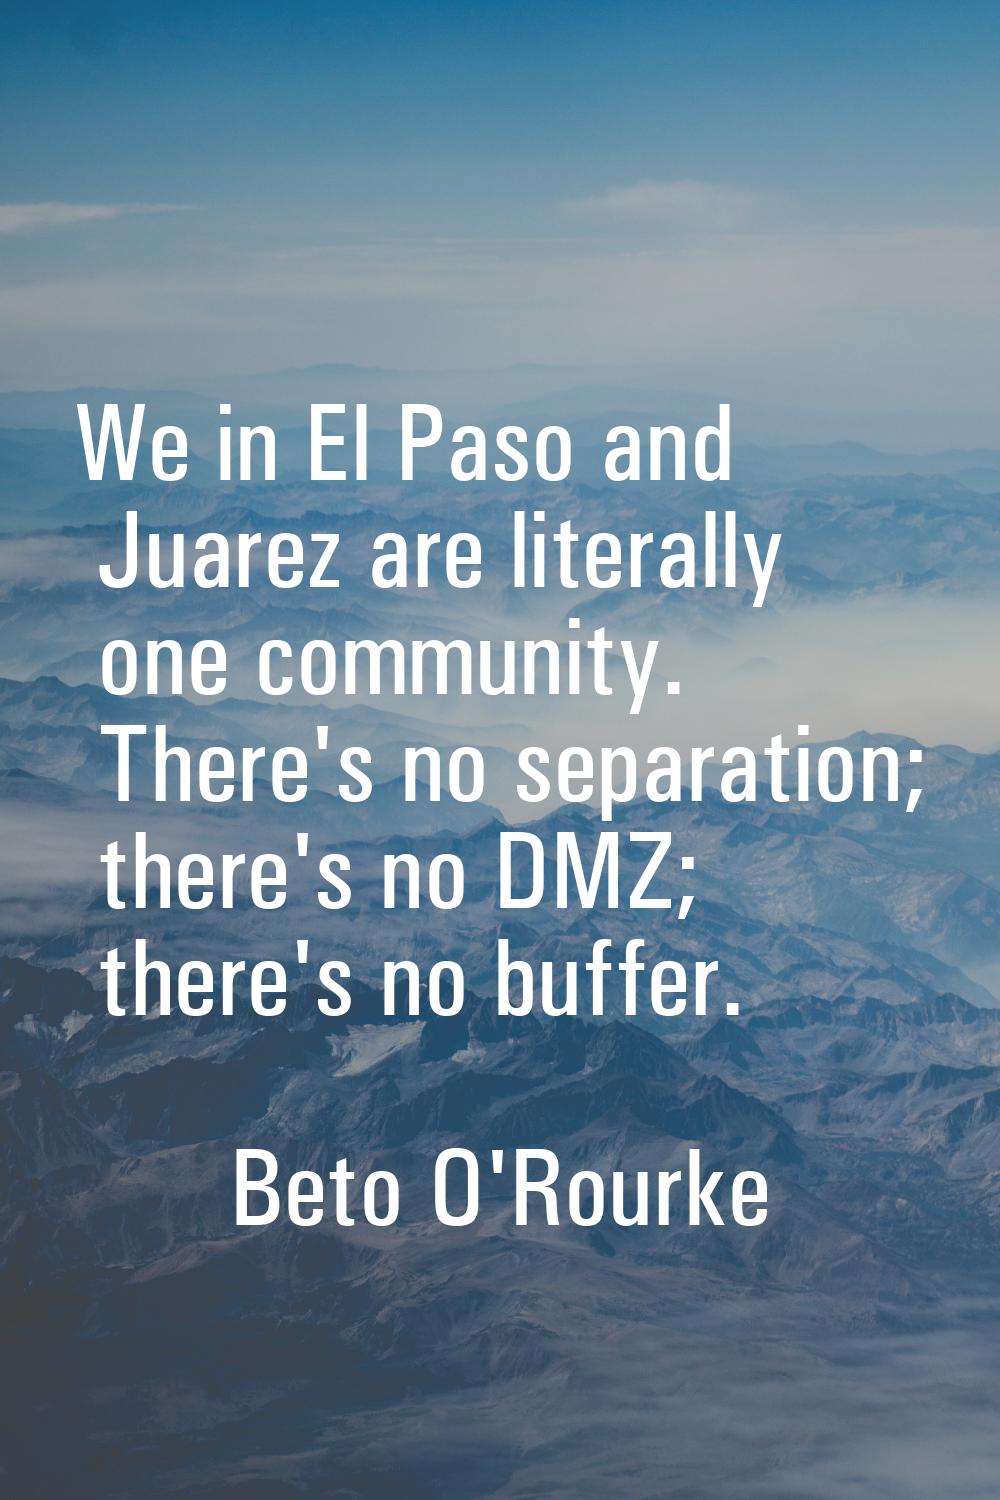 We in El Paso and Juarez are literally one community. There's no separation; there's no DMZ; there'